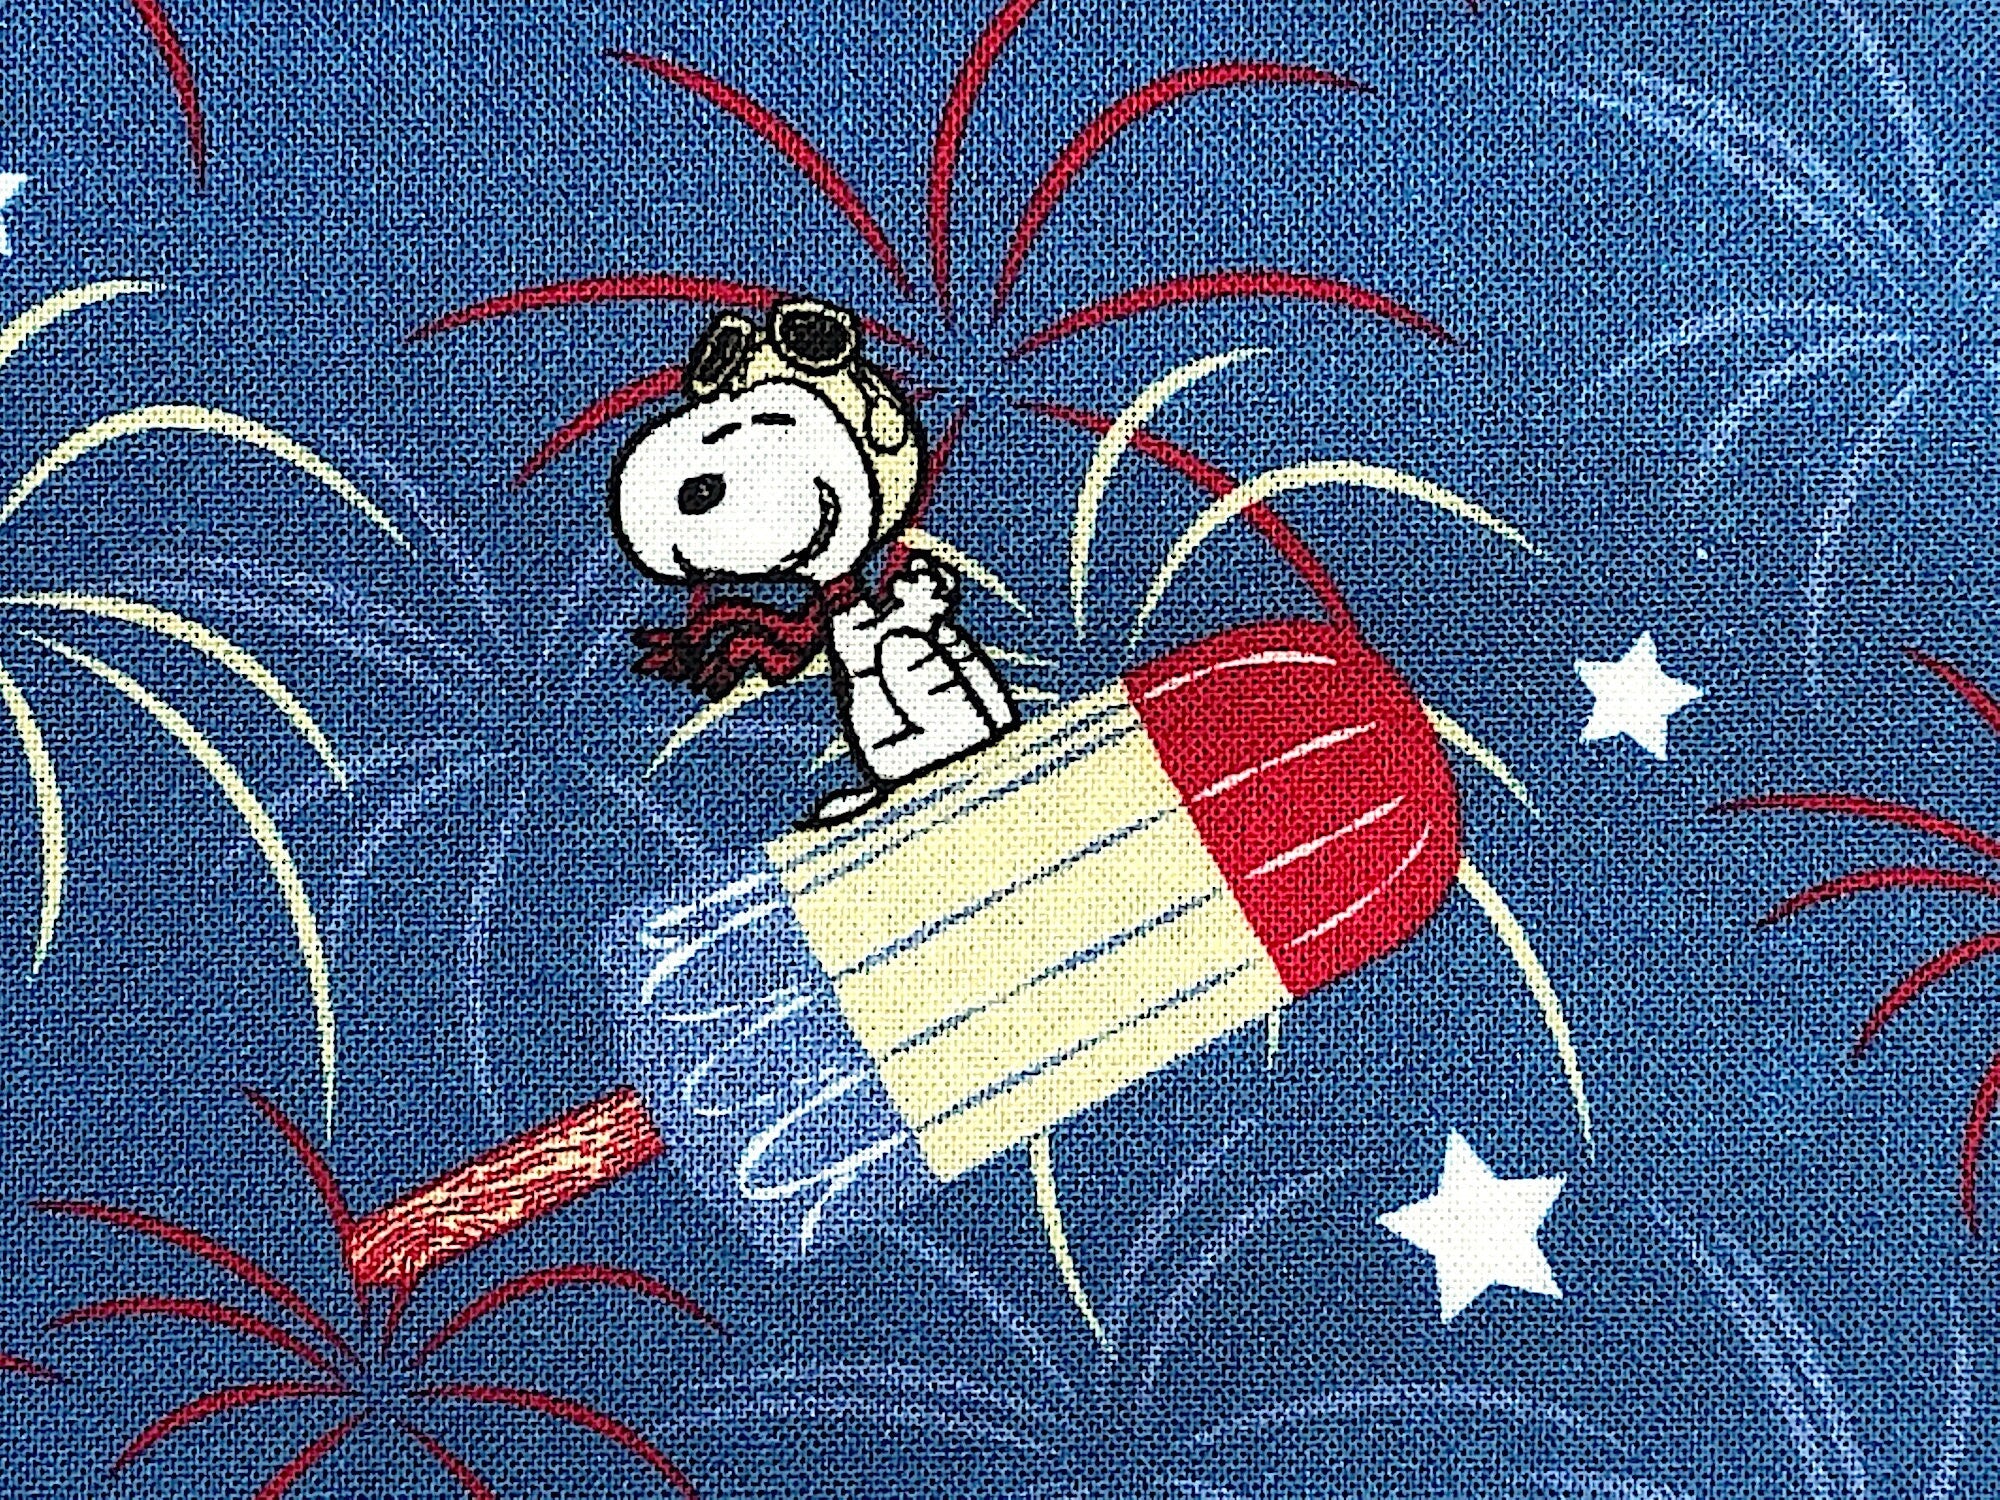 Close up of Snoopy sitting on a popsicle.